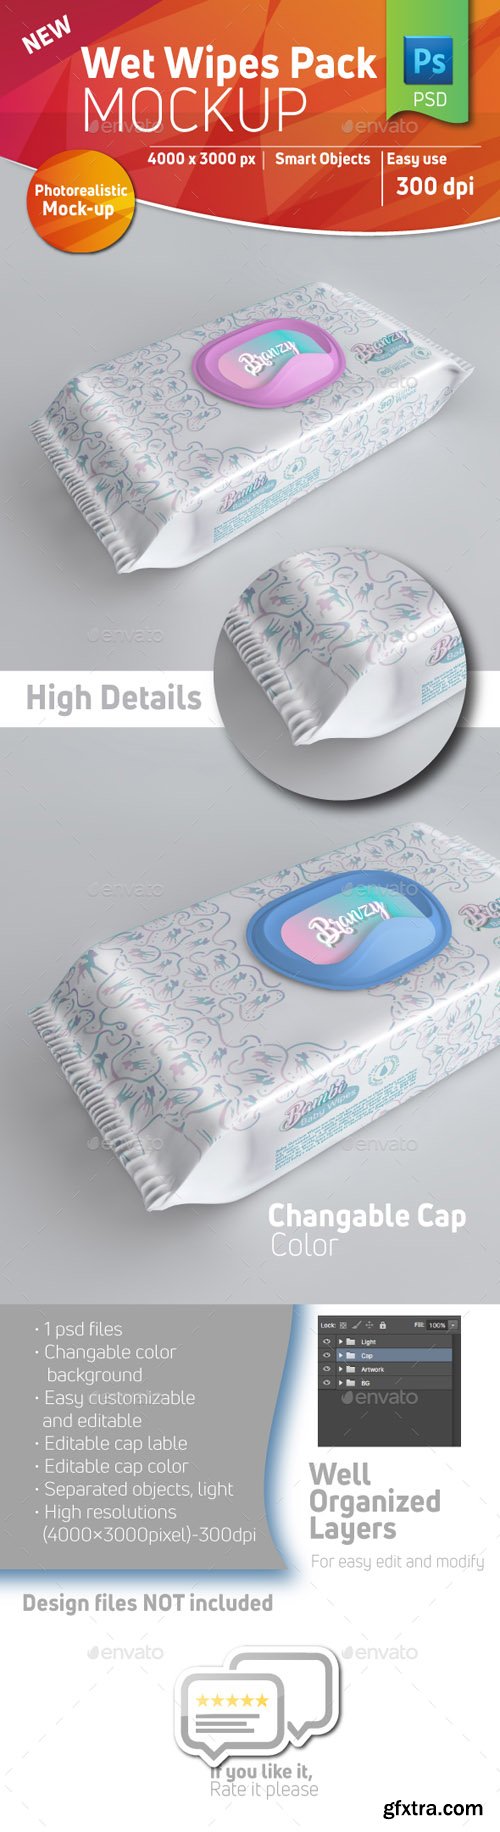 GR - Baby Wet Wipes Pack Mockup With Plastic Cap 20860151